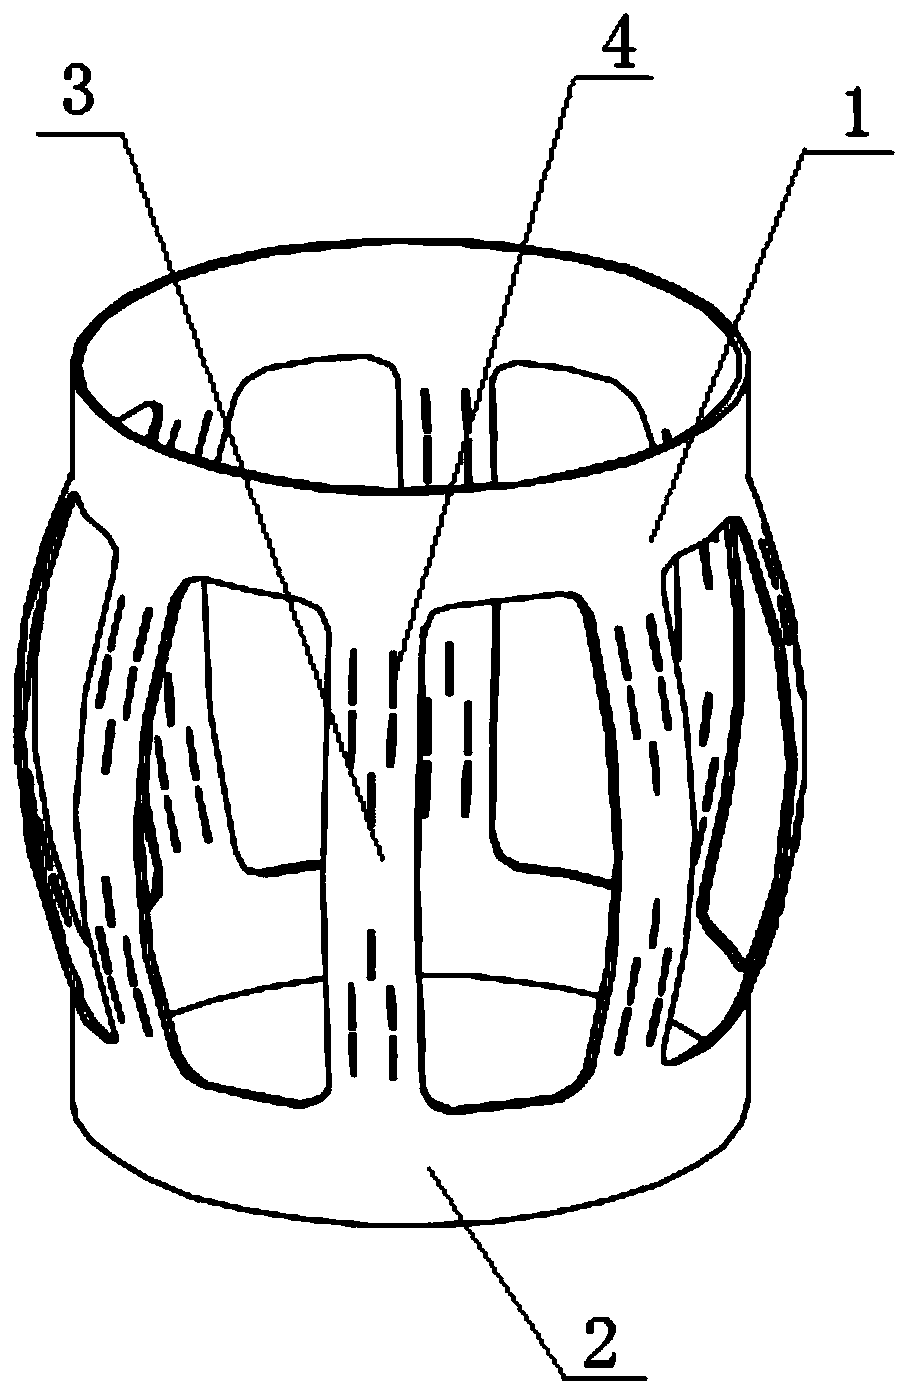 Centralizer